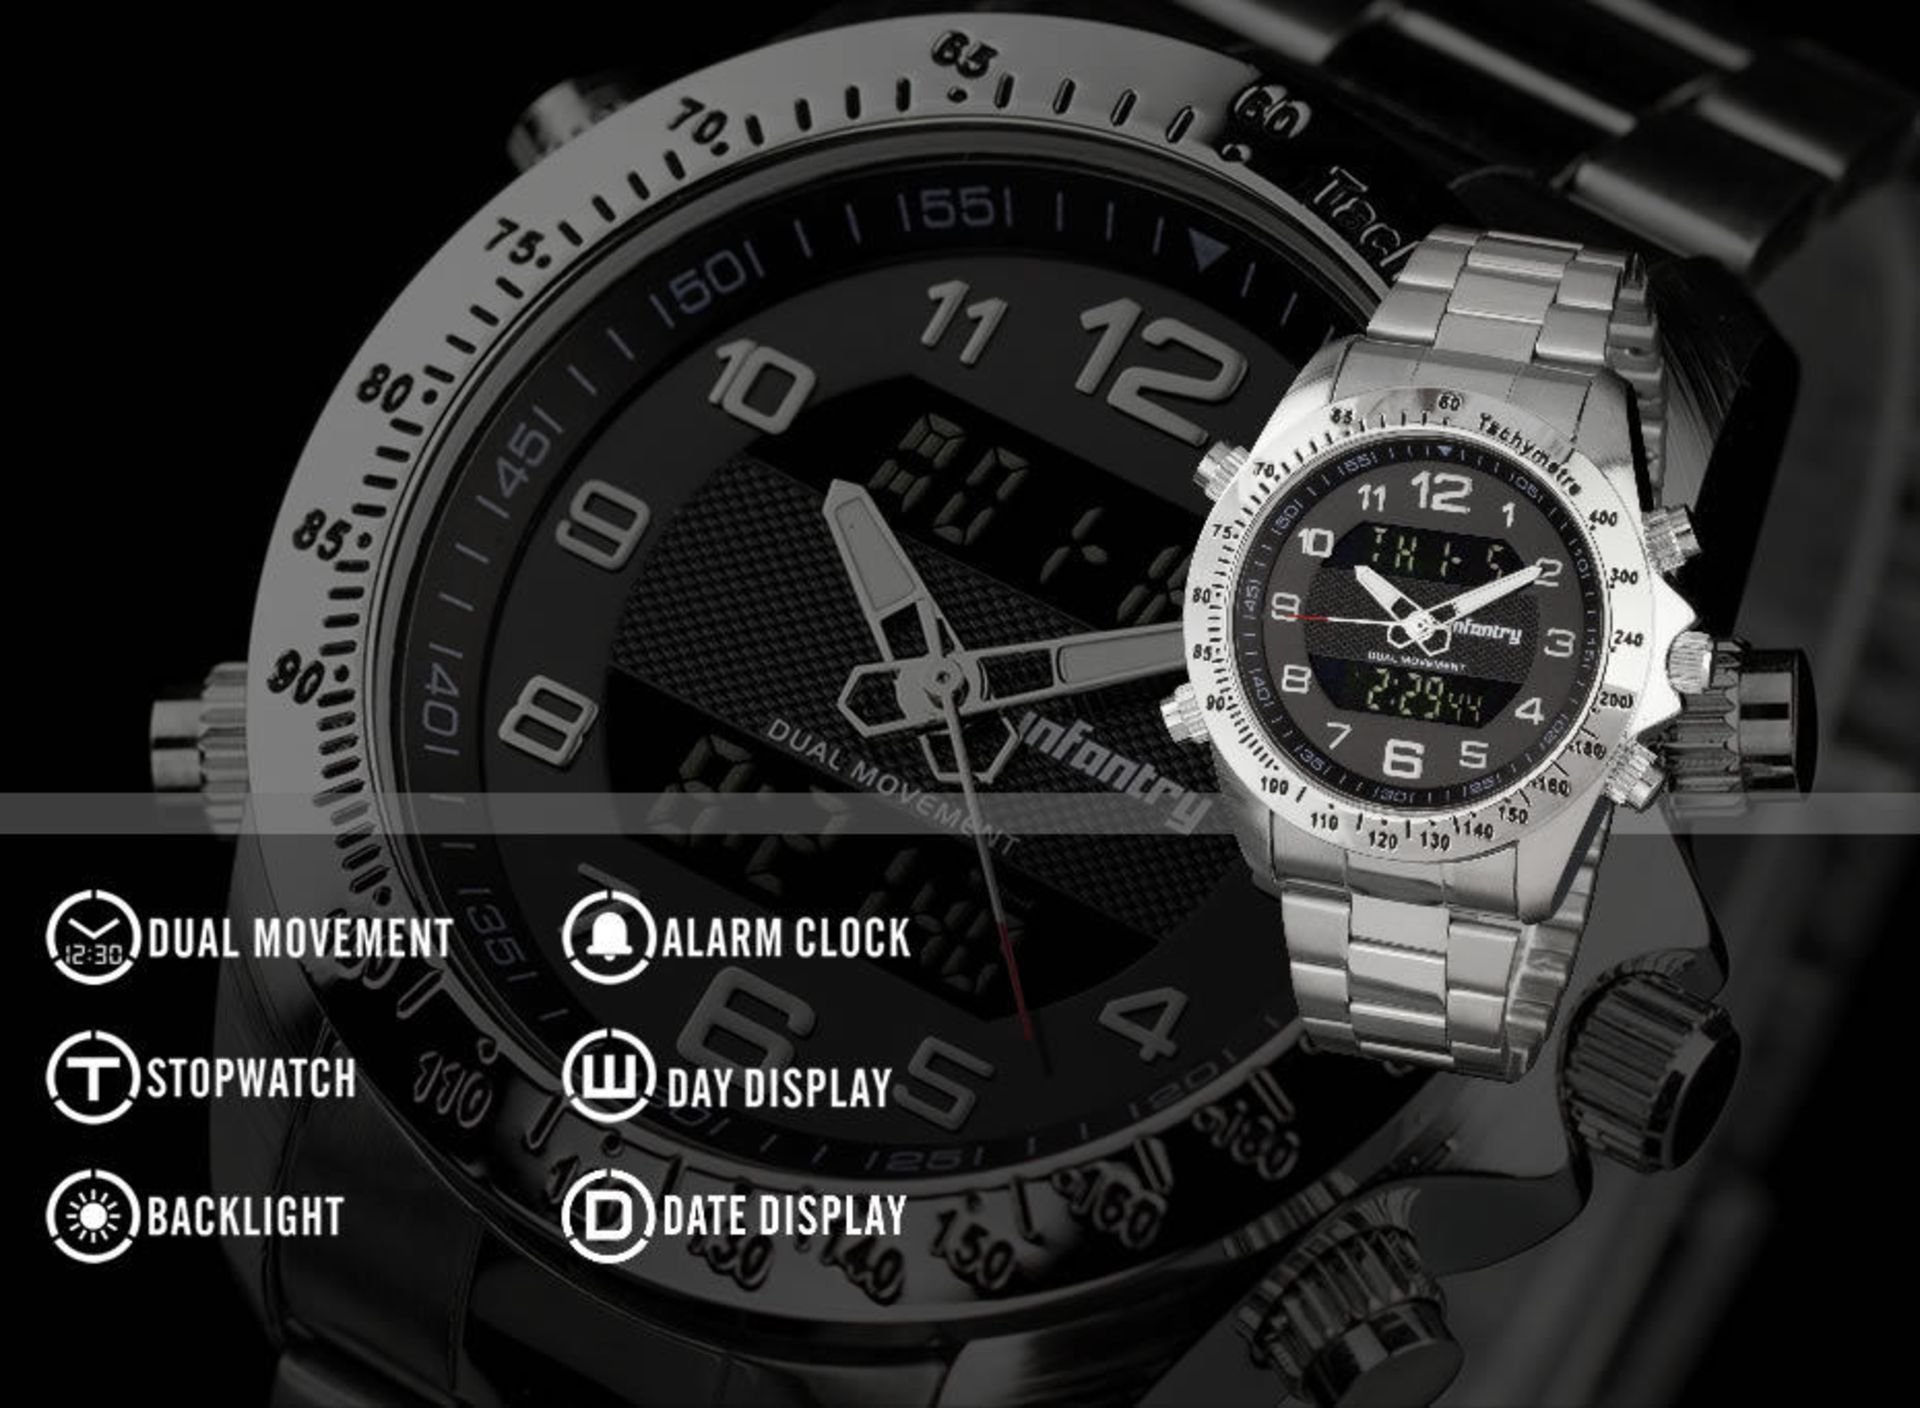 MENS INFANTRY ARMY SILVER SPORT DIGITAL QUARTZ WRIST WATCH CHRONOGRAPH STAINLESS STEEL - Image 2 of 9